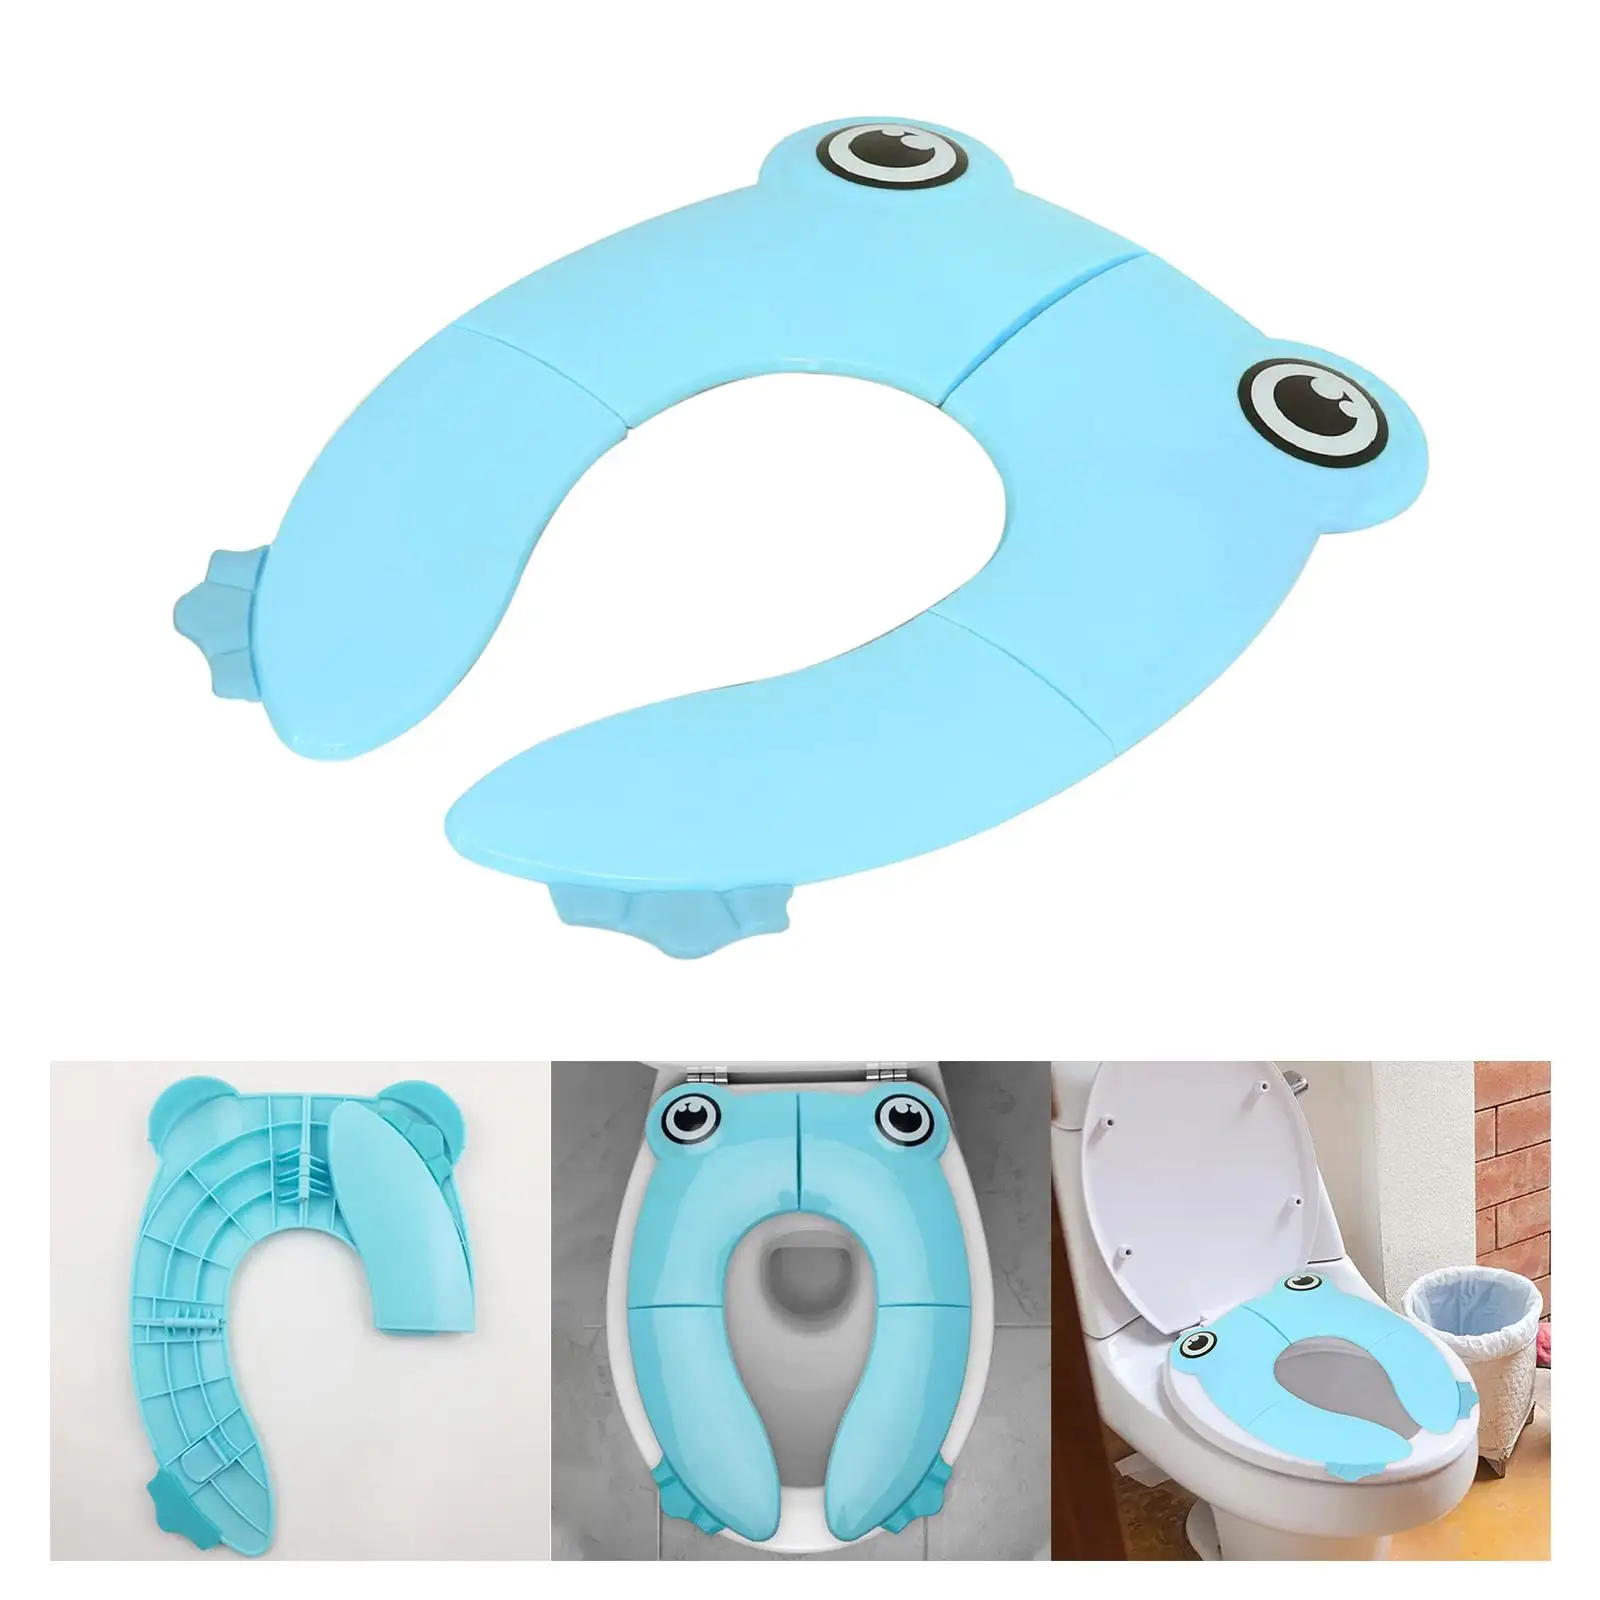 Foldable Toilet Seat Cushion with Storage Bag Portable for Camping Toddler